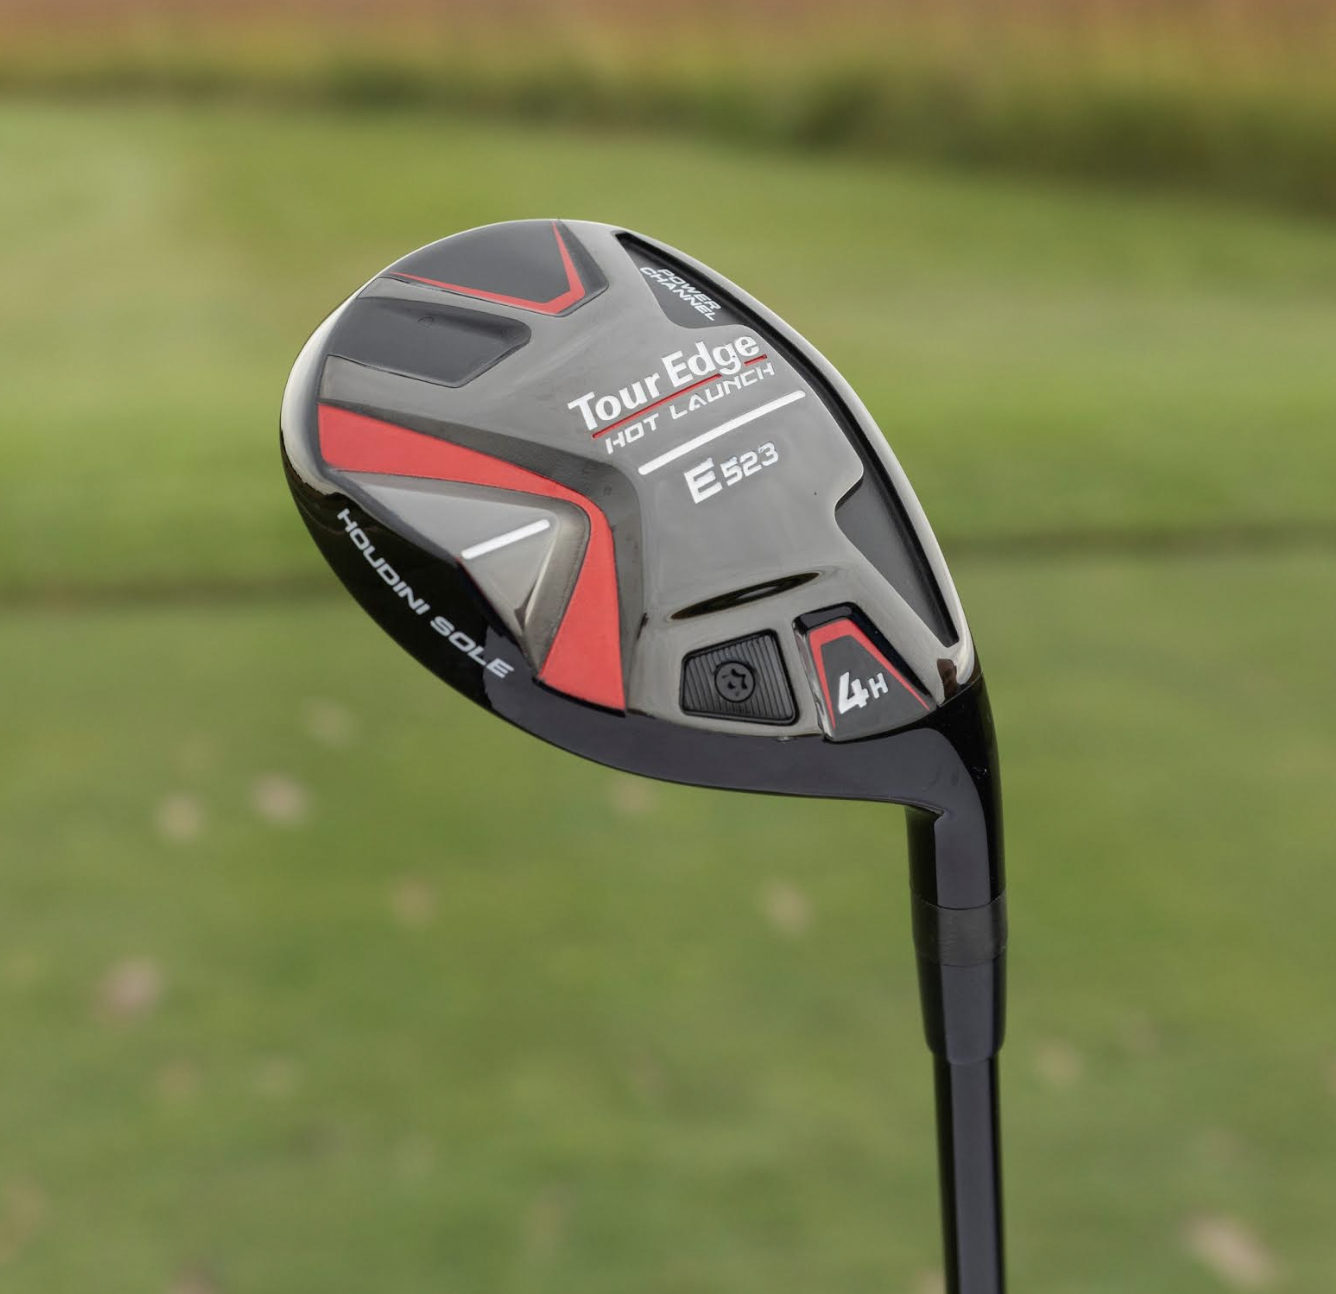 Tour Edge launches new Hot Launch 523 series drivers, woods and